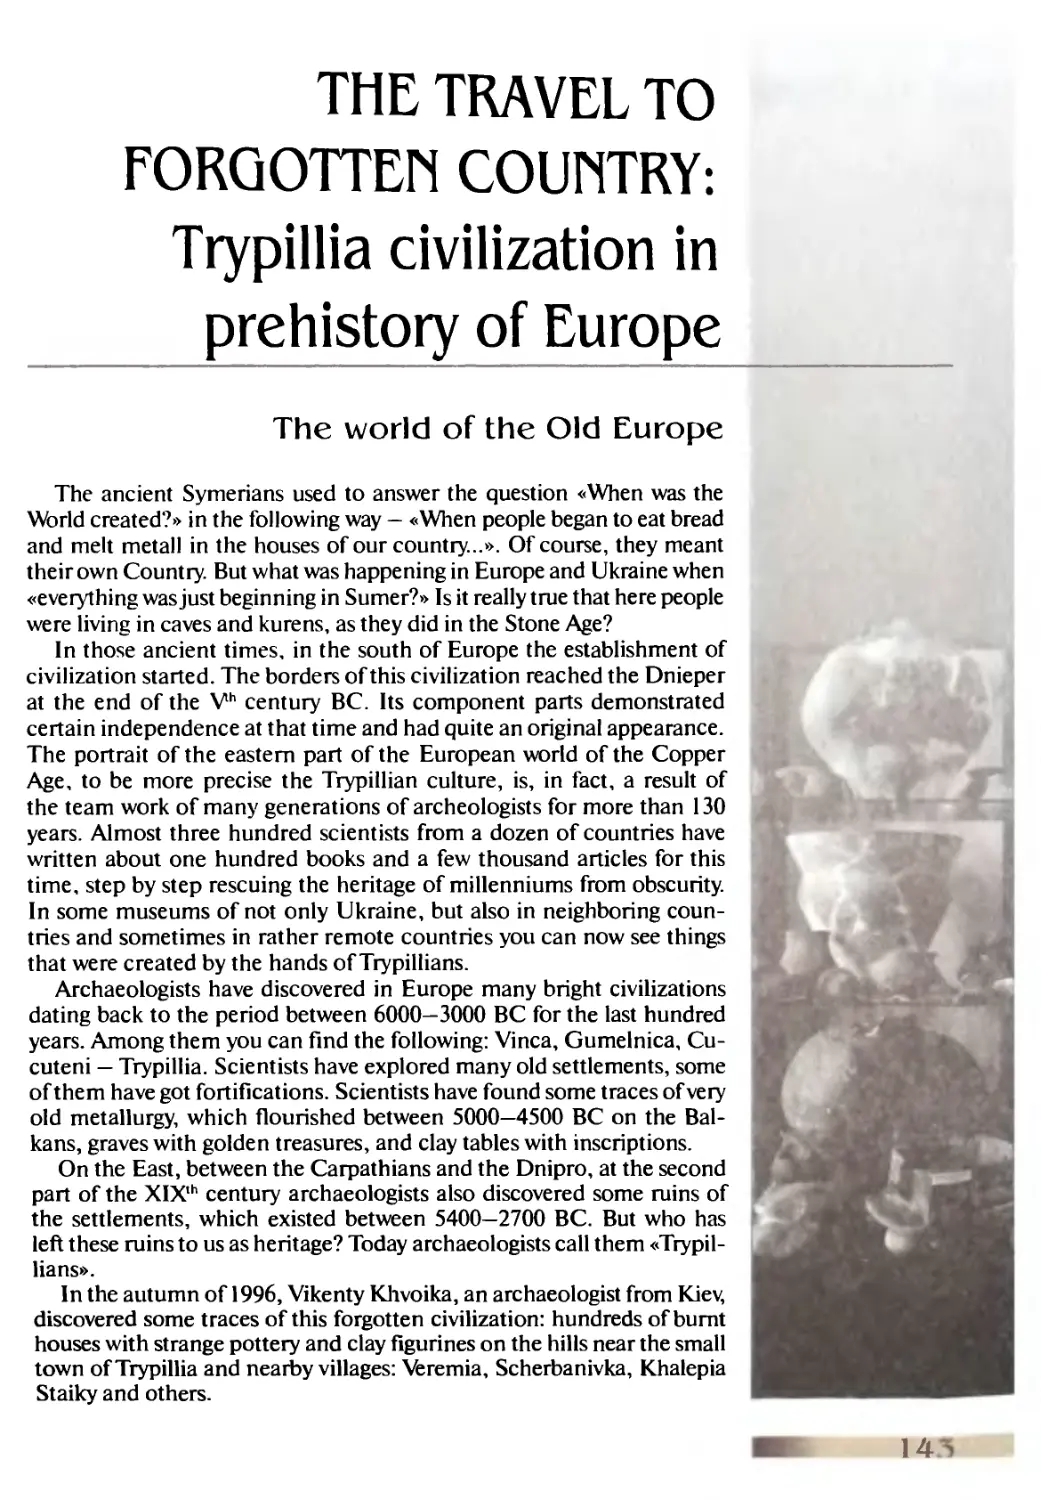 The travel to forgotten country: Trypillia civilization in prehistory of Europe